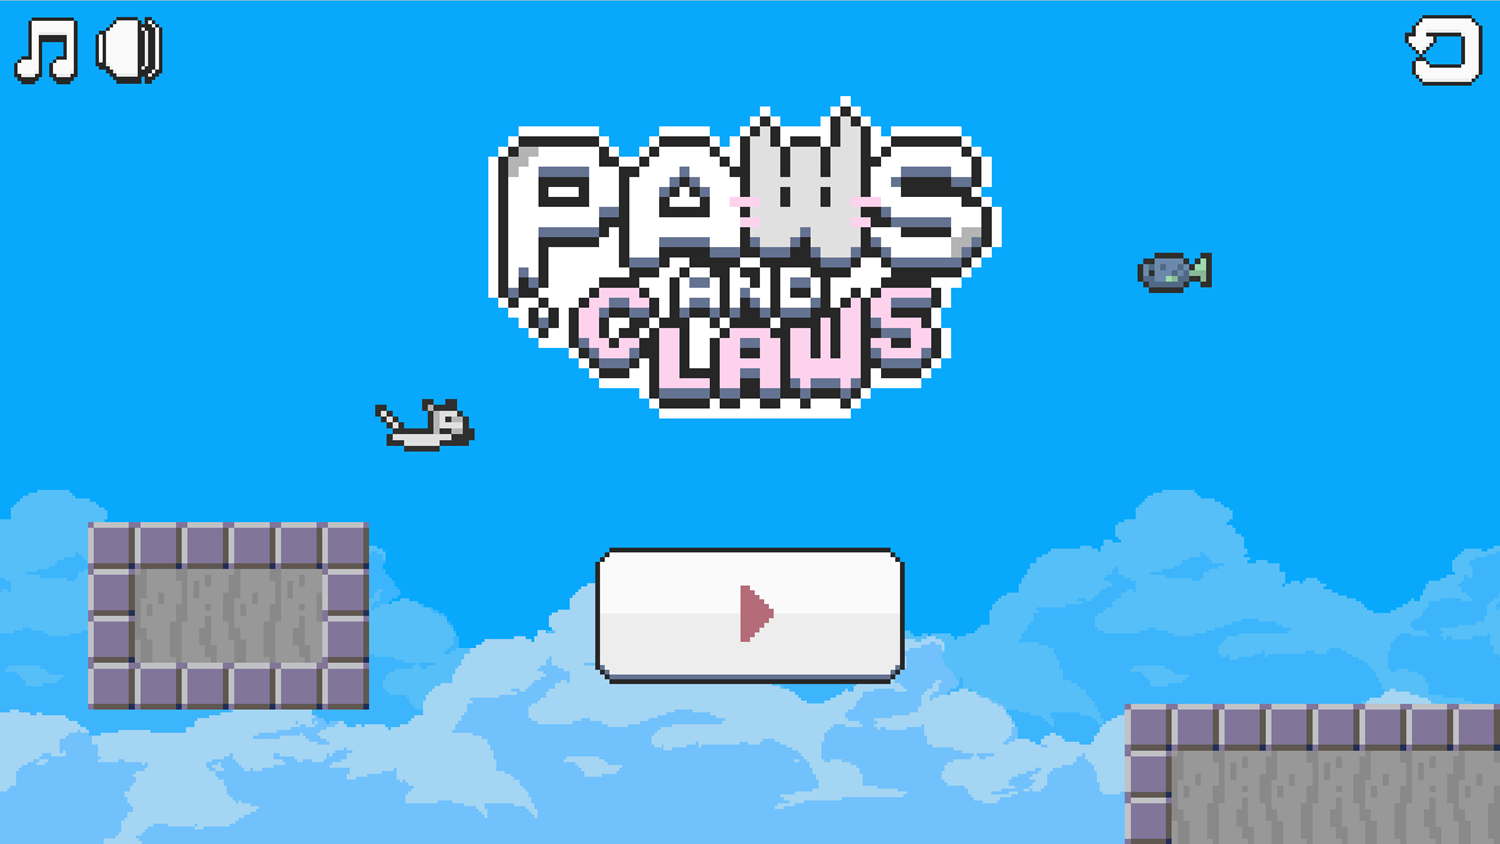 Paws and Claws Game Welcome Screen Screenshot.